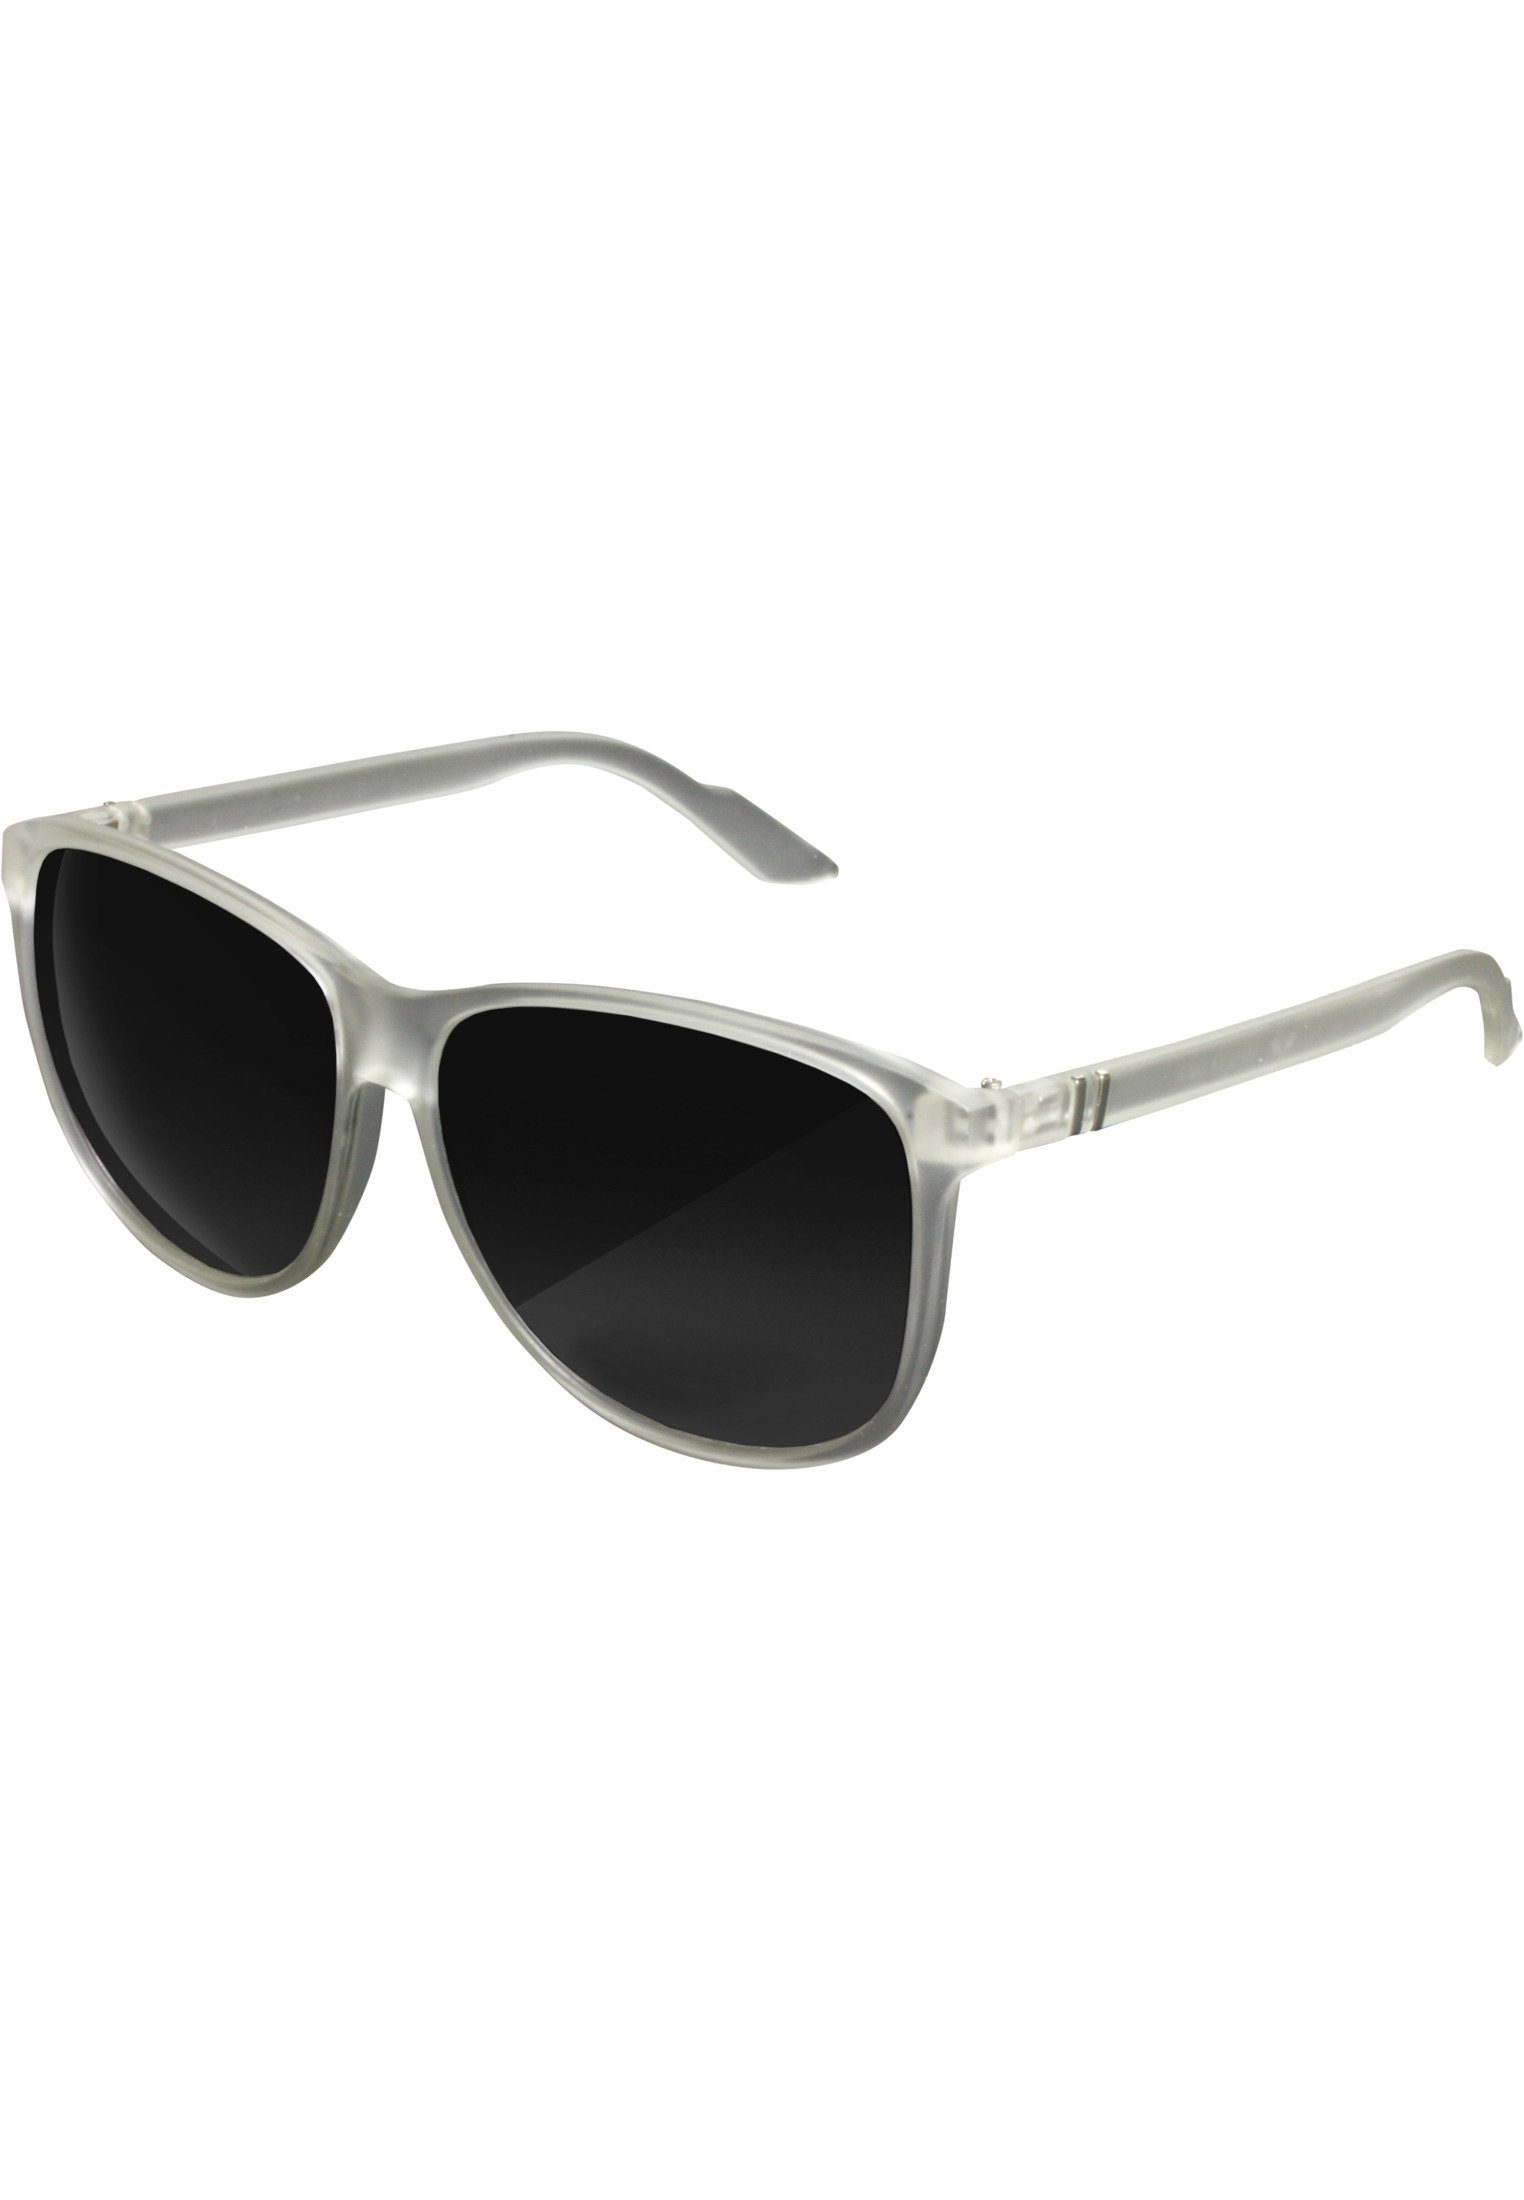 Sunglasses Chirwa clear Sonnenbrille MSTRDS Accessoires